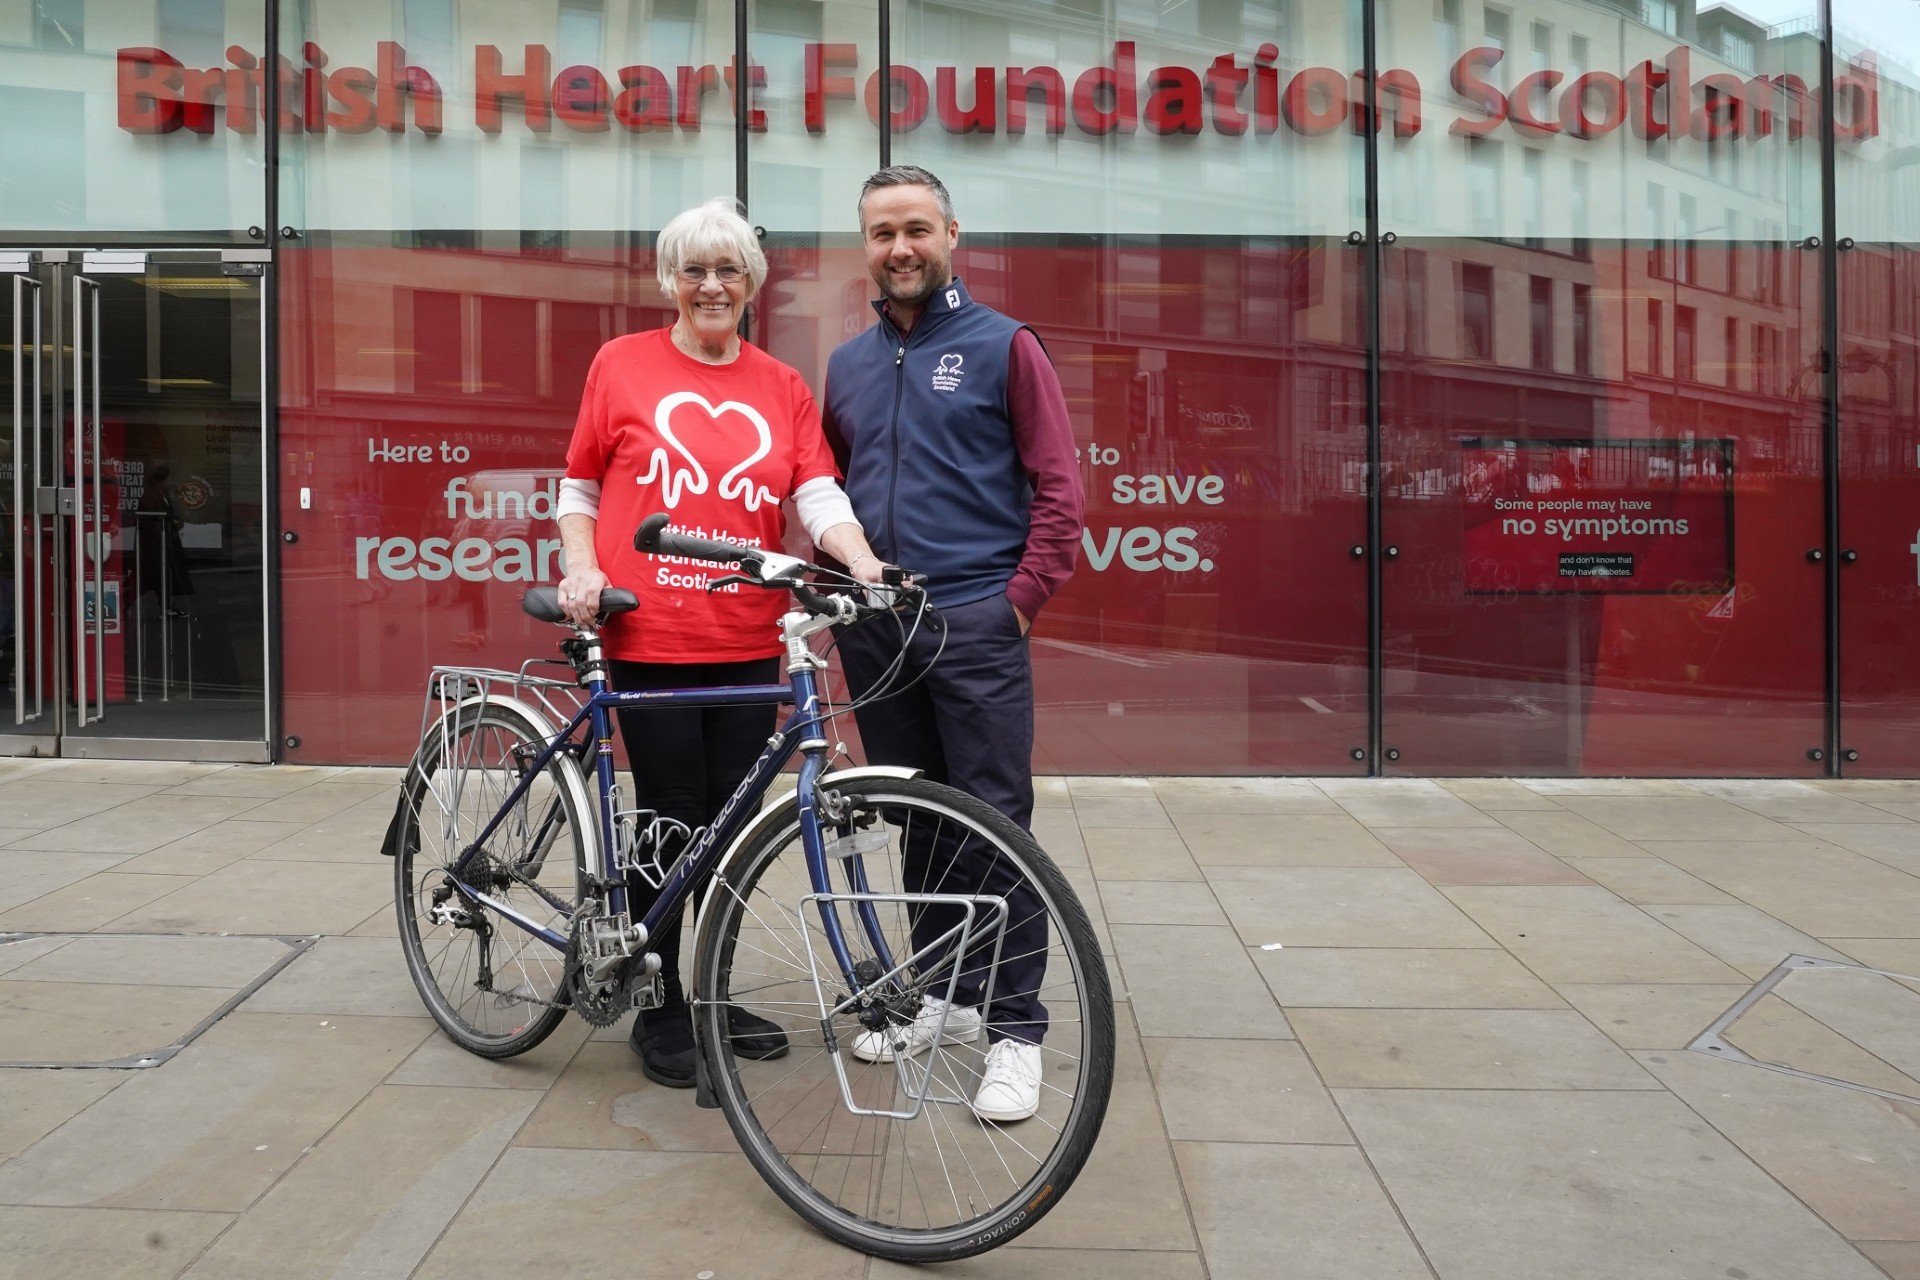 She previously held the record as the oldest woman to cycle the 1000-mile route from Land’s End to John O’Groats.